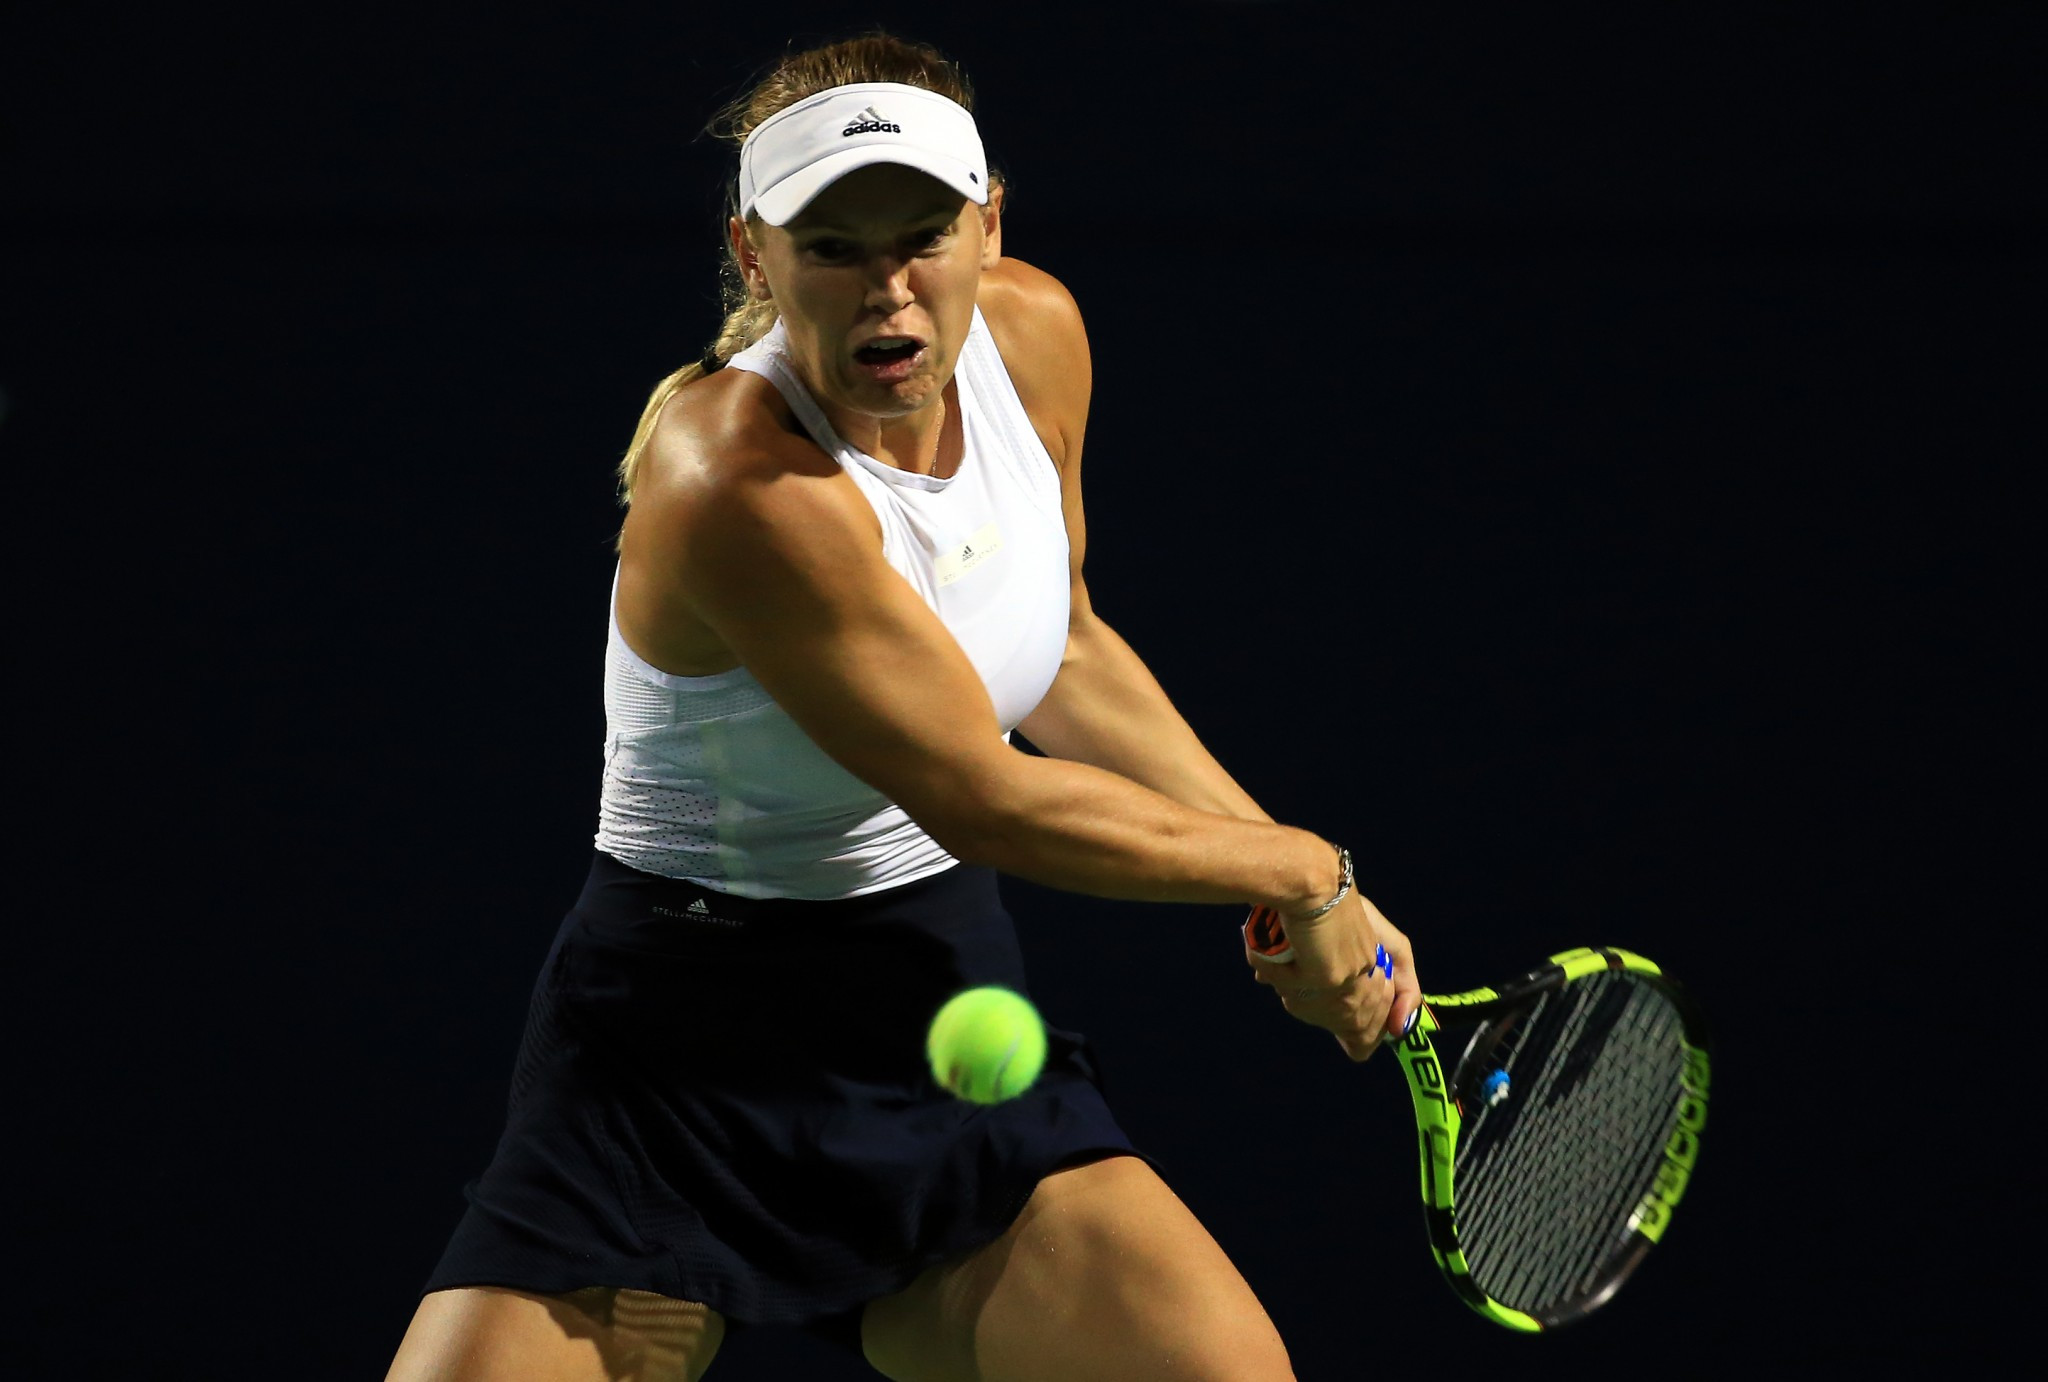 Wozniacki eases through as Bouchard and Thiem exit Rogers Cup